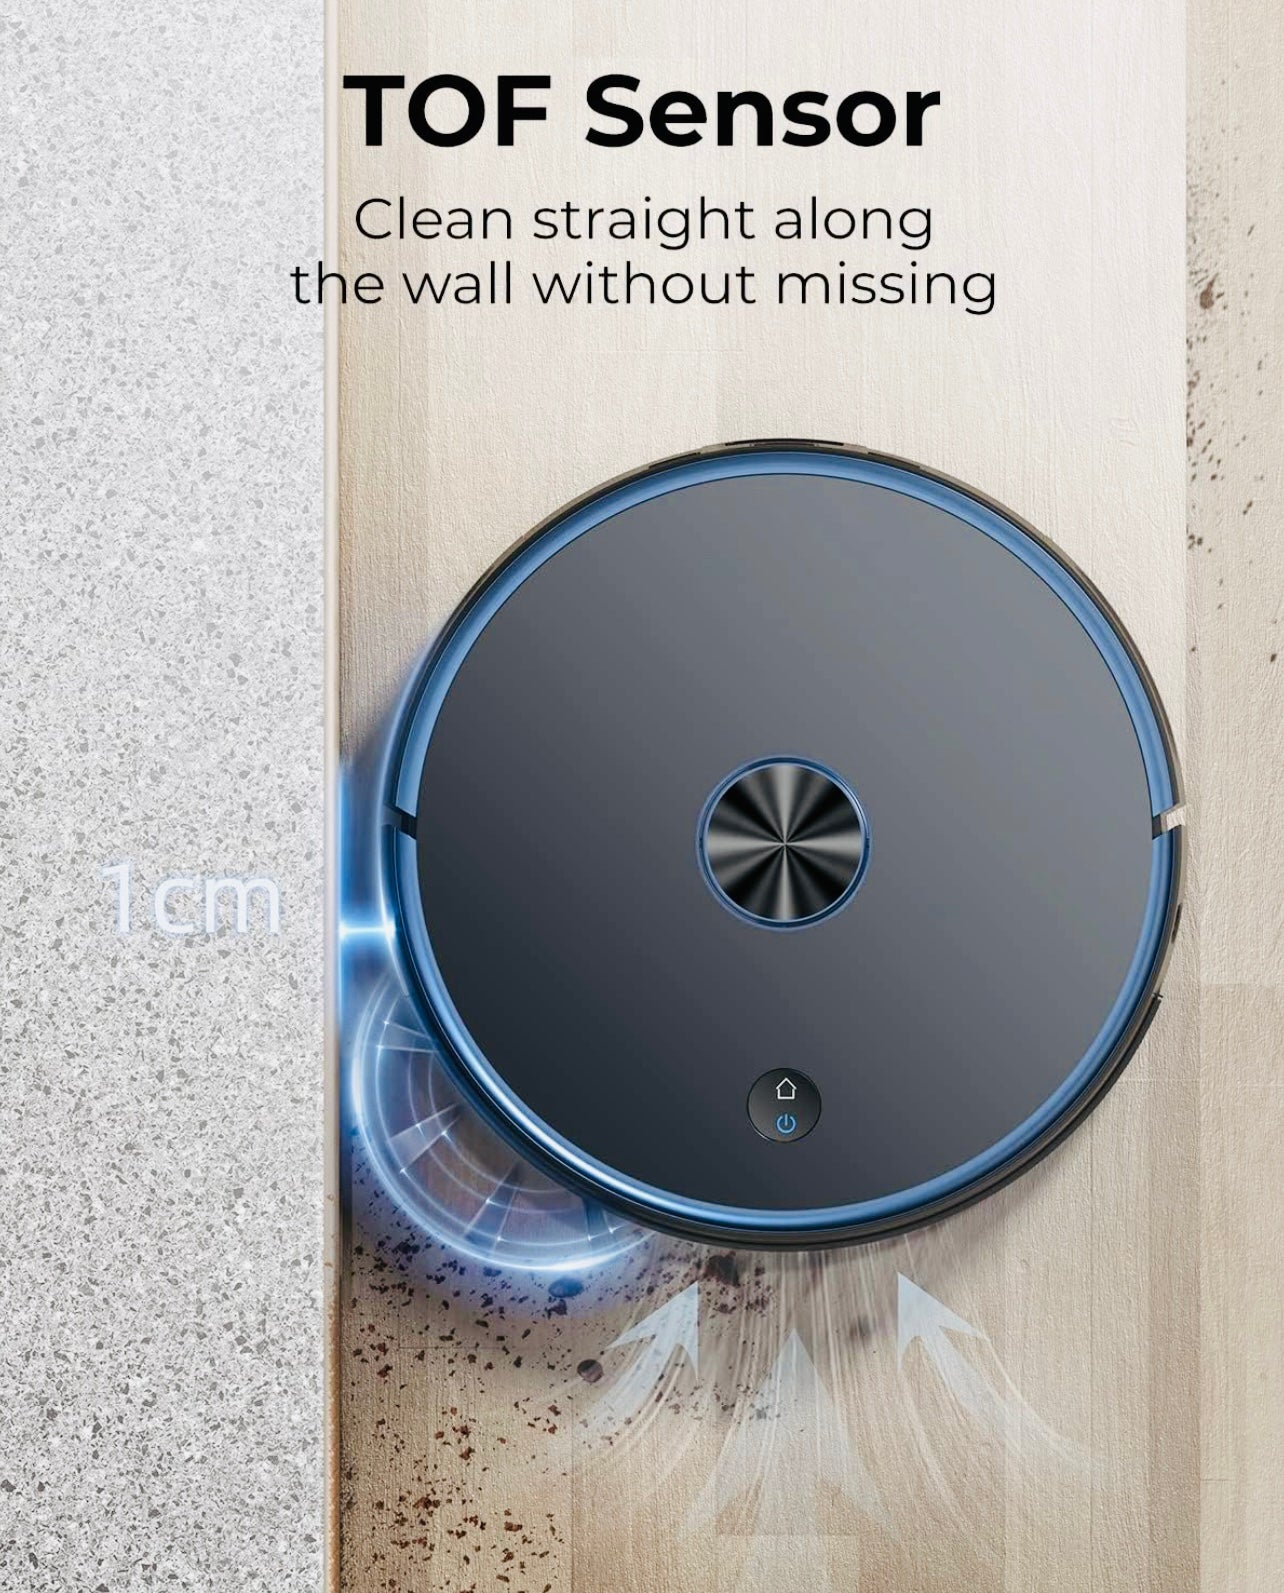 Laresar Robot Vacuum Cleaner with Mop,3500Pa Robotic Vacuum with 3.5L Self Emptying Station,Works with Alexa,Editable Map,Lidar Navigation,3 In 1,Robot Hoover for Pet Hair,Smart App Control(L6 Pro)